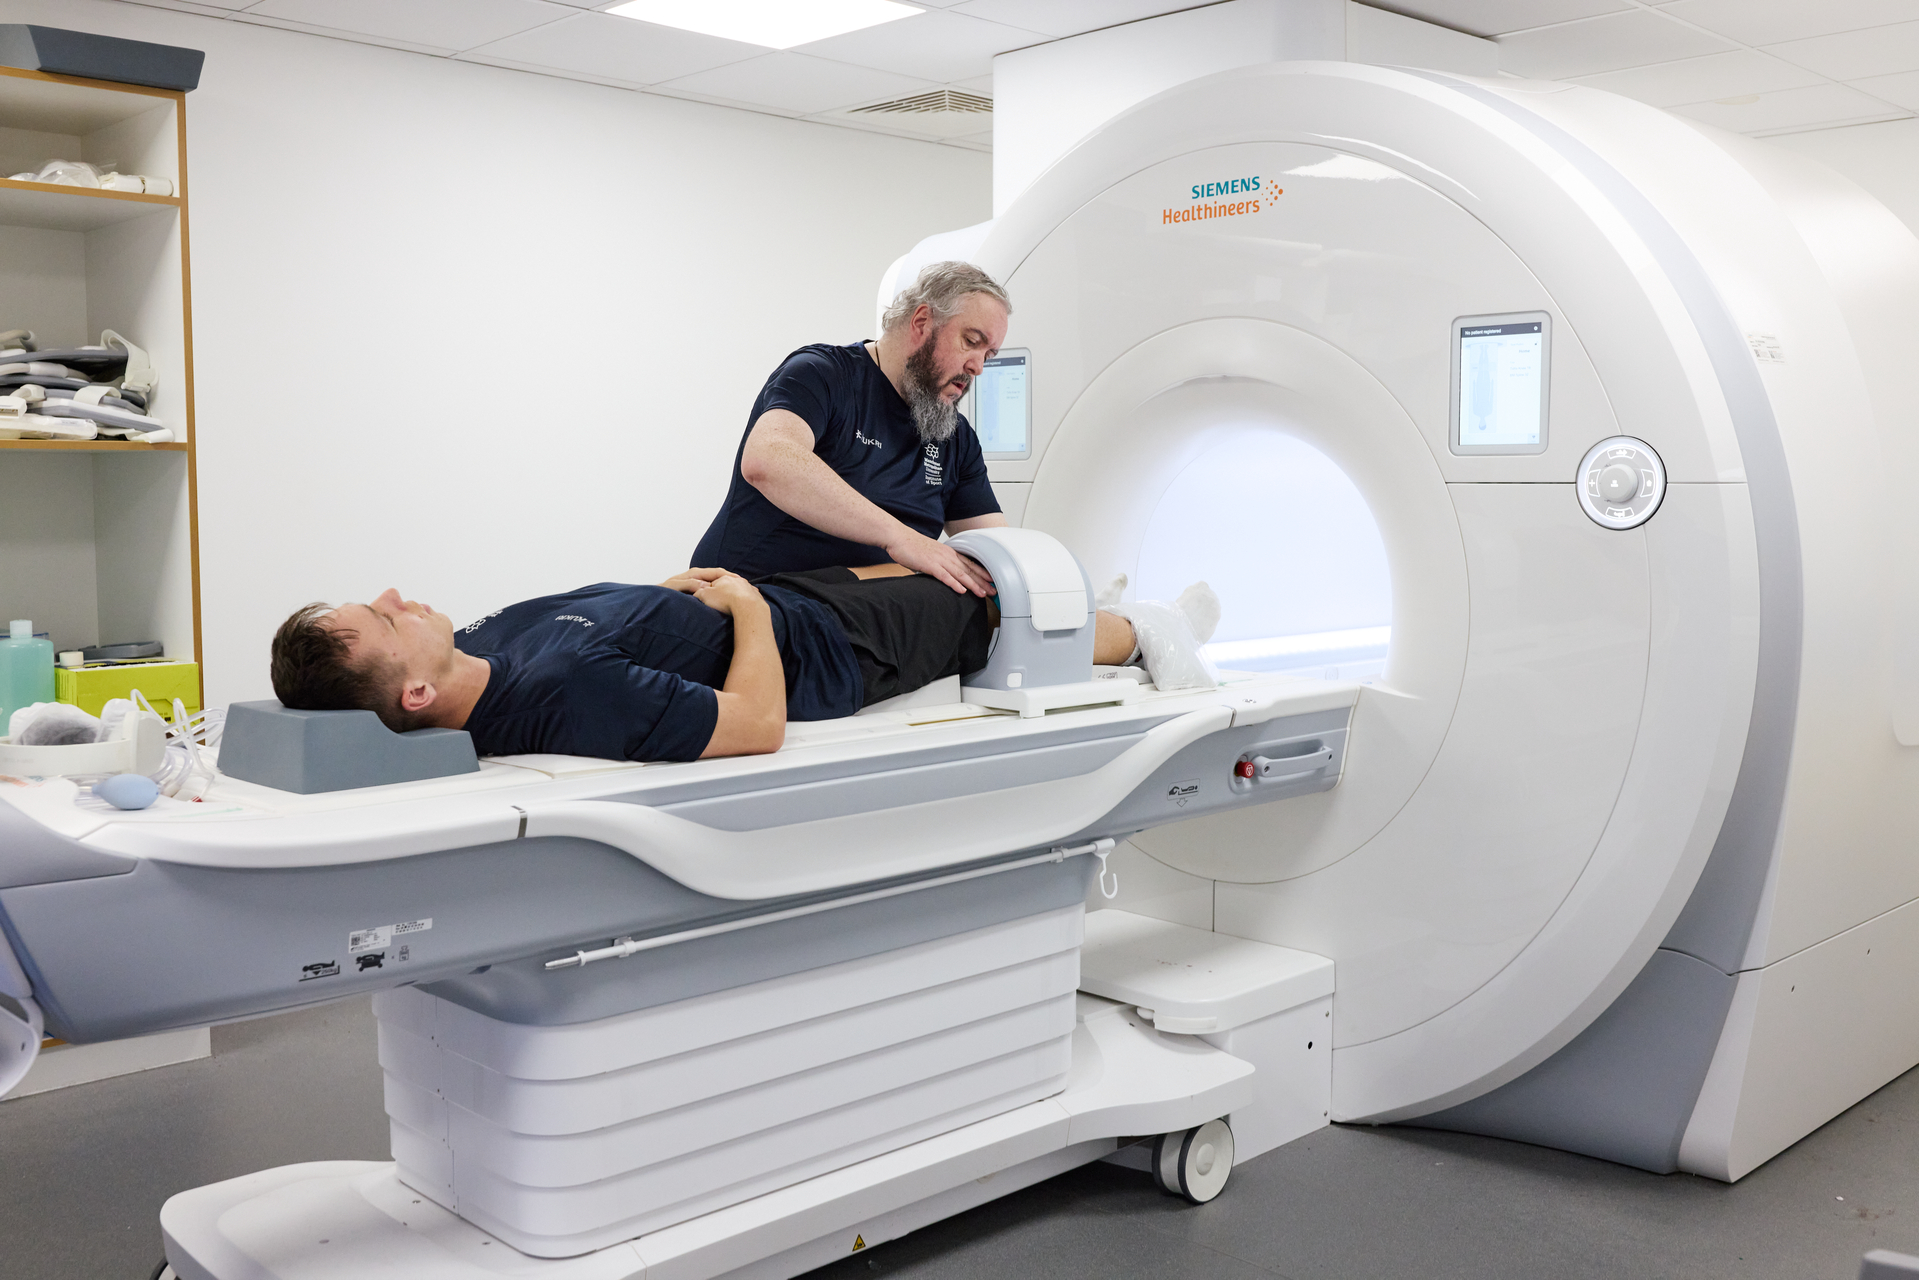 The new biomedical imaging equipment will support Manchester Metropolitan University Institute of Sport’s MRI scanner (pictured)